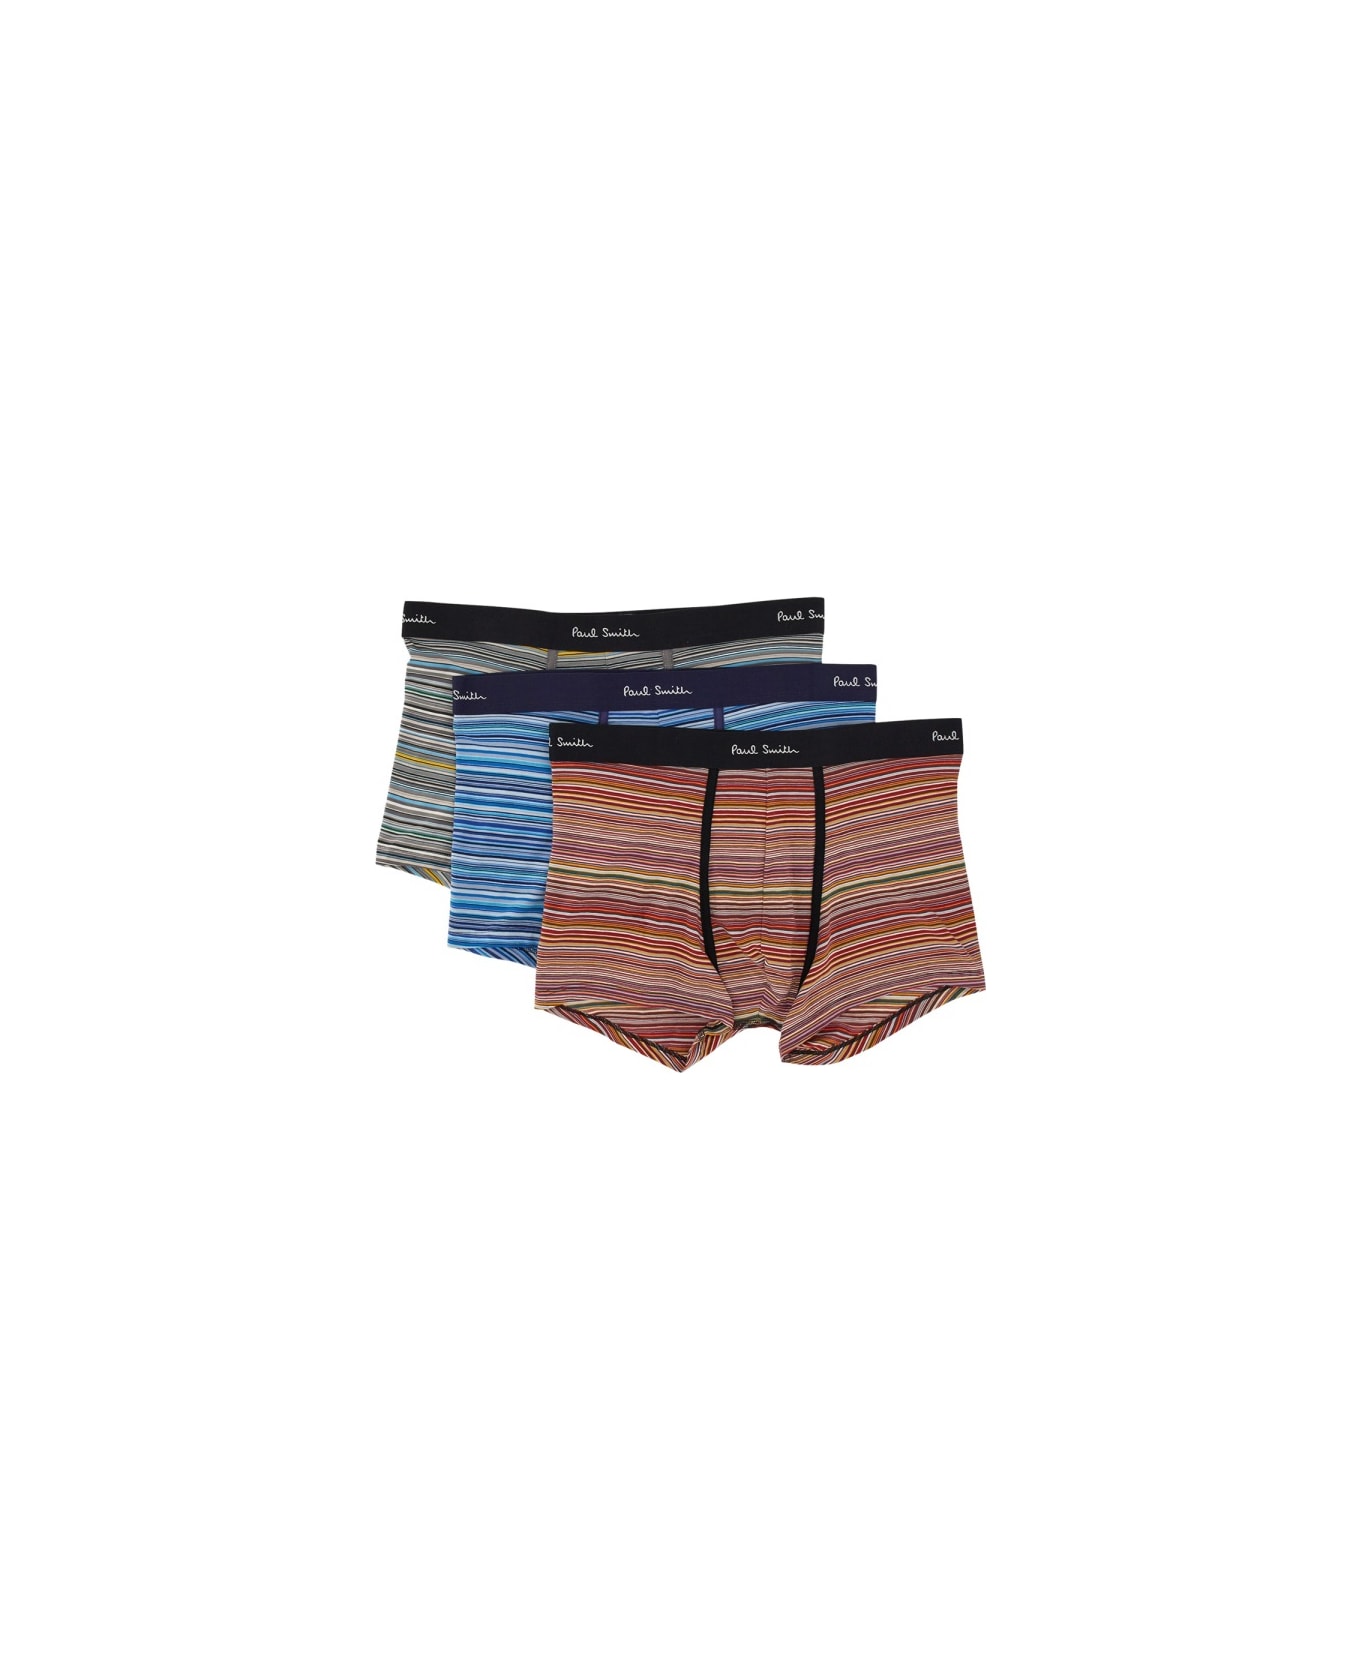 Paul Smith Pack Of Three Boxers - BLUE/RED